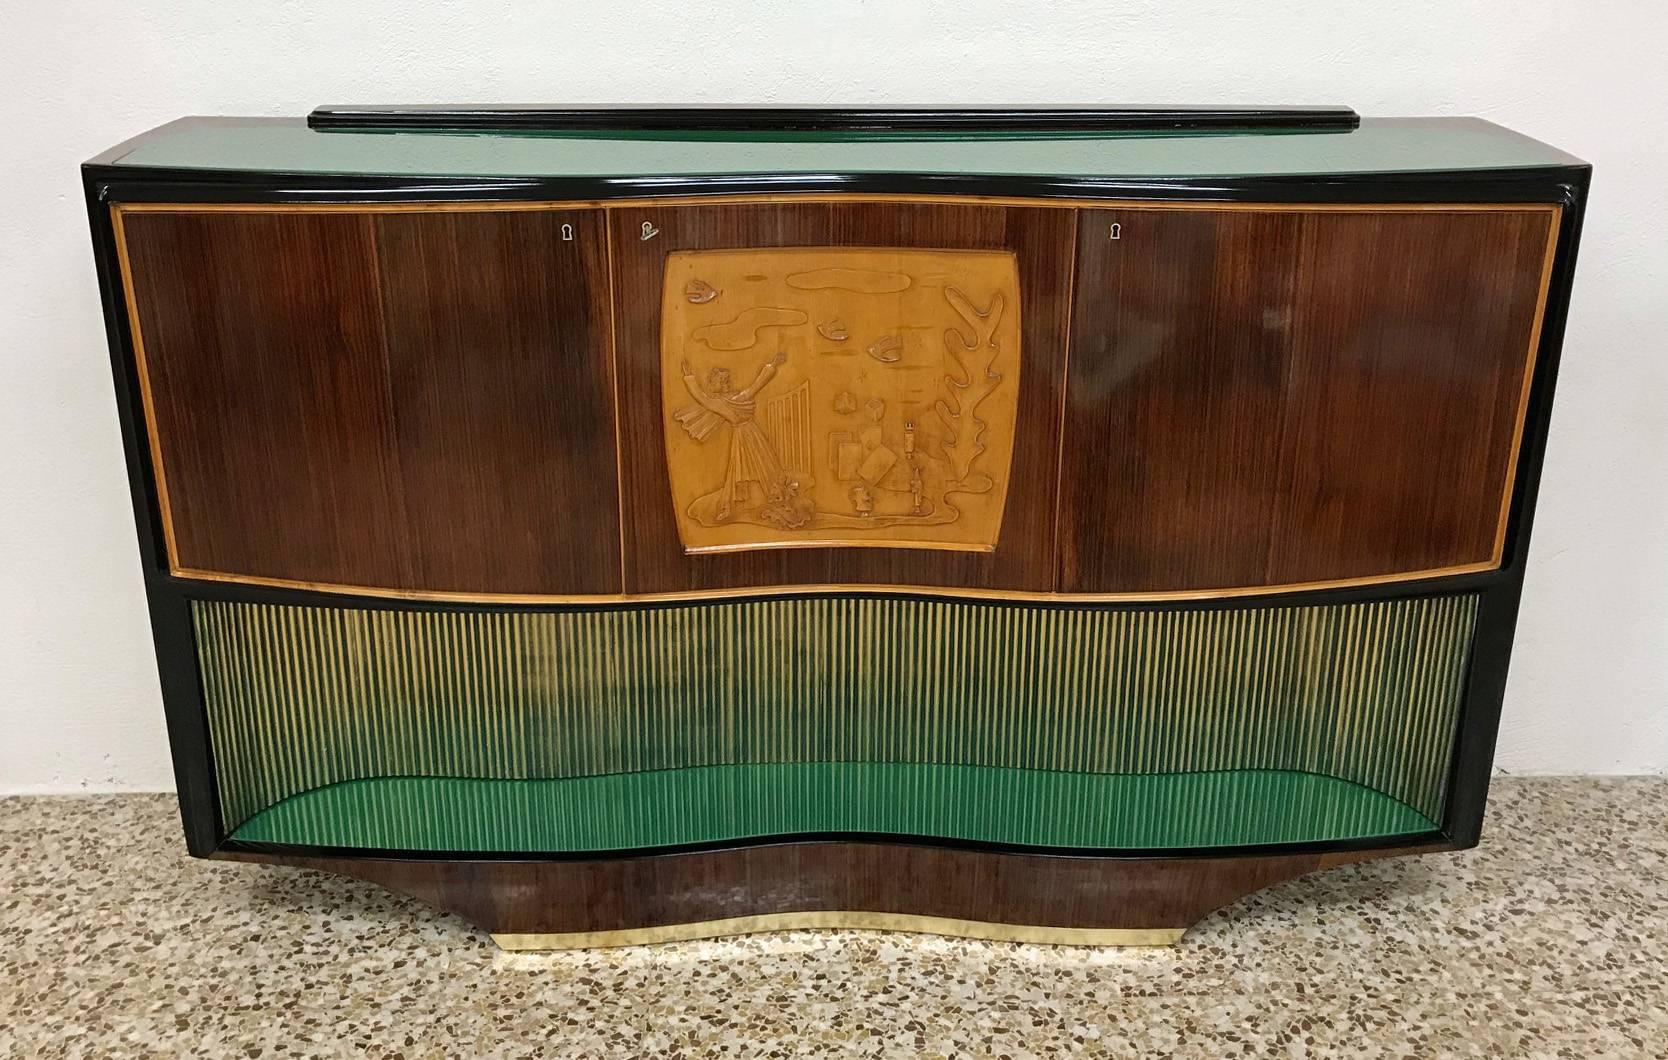 This buffet was produced in Italy in the 1950s by Vittorio Dassi for ' Esposizione Permanente mobili Cantù '.
The central doors are embellished by a fine maple carving, the solid wood base is green lacquered with gold details. The top is covered